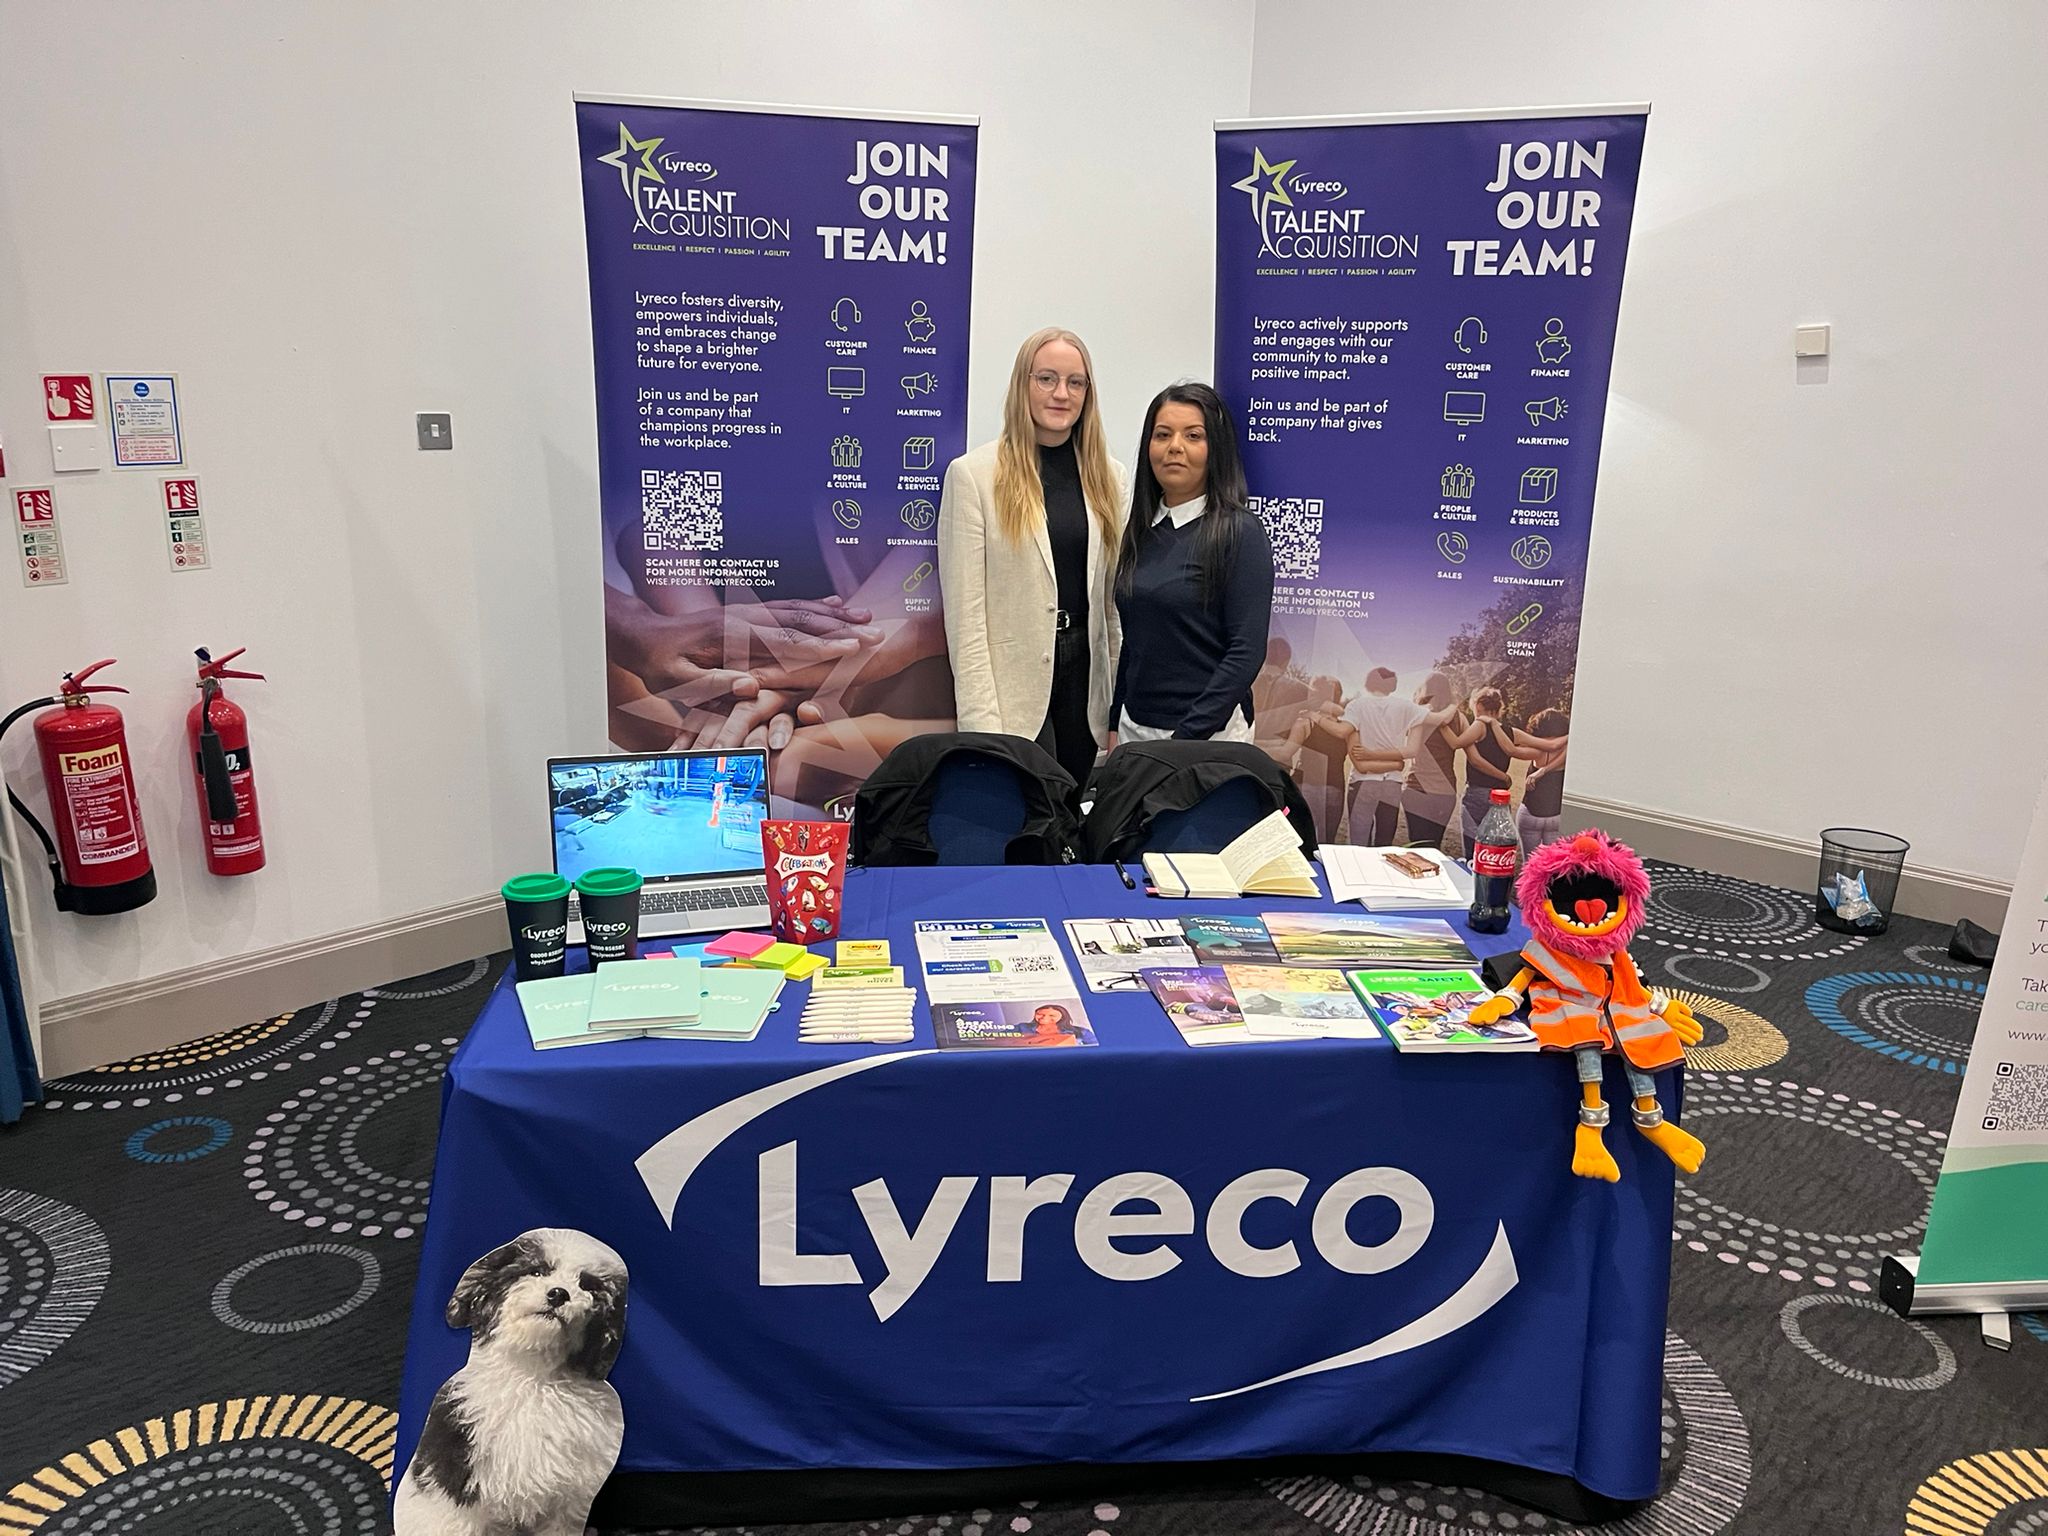 Lyreco at our event in Telford & Shrewsbury